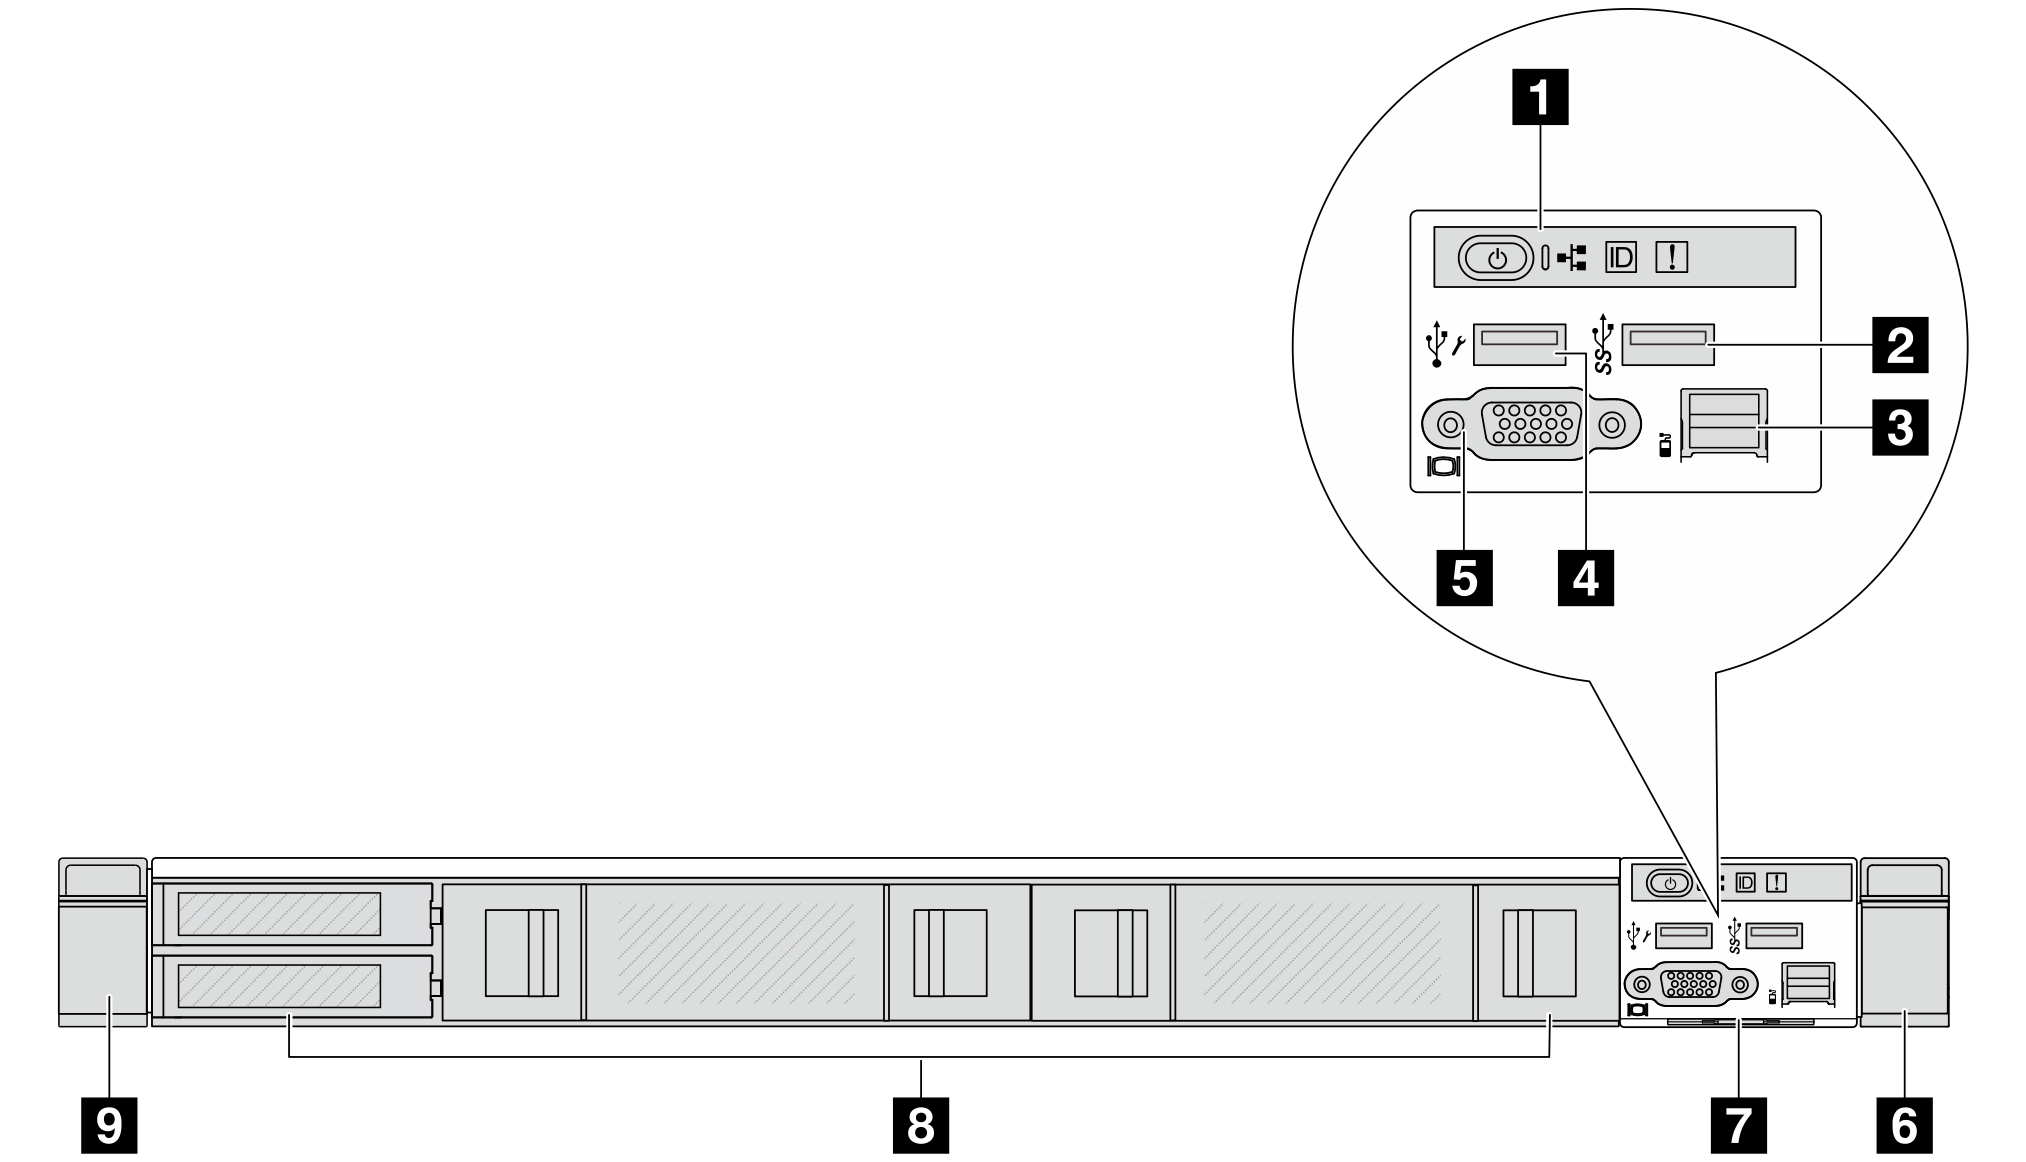 Front view of server model without a backplane (for ten 2.5-inch drive bays)